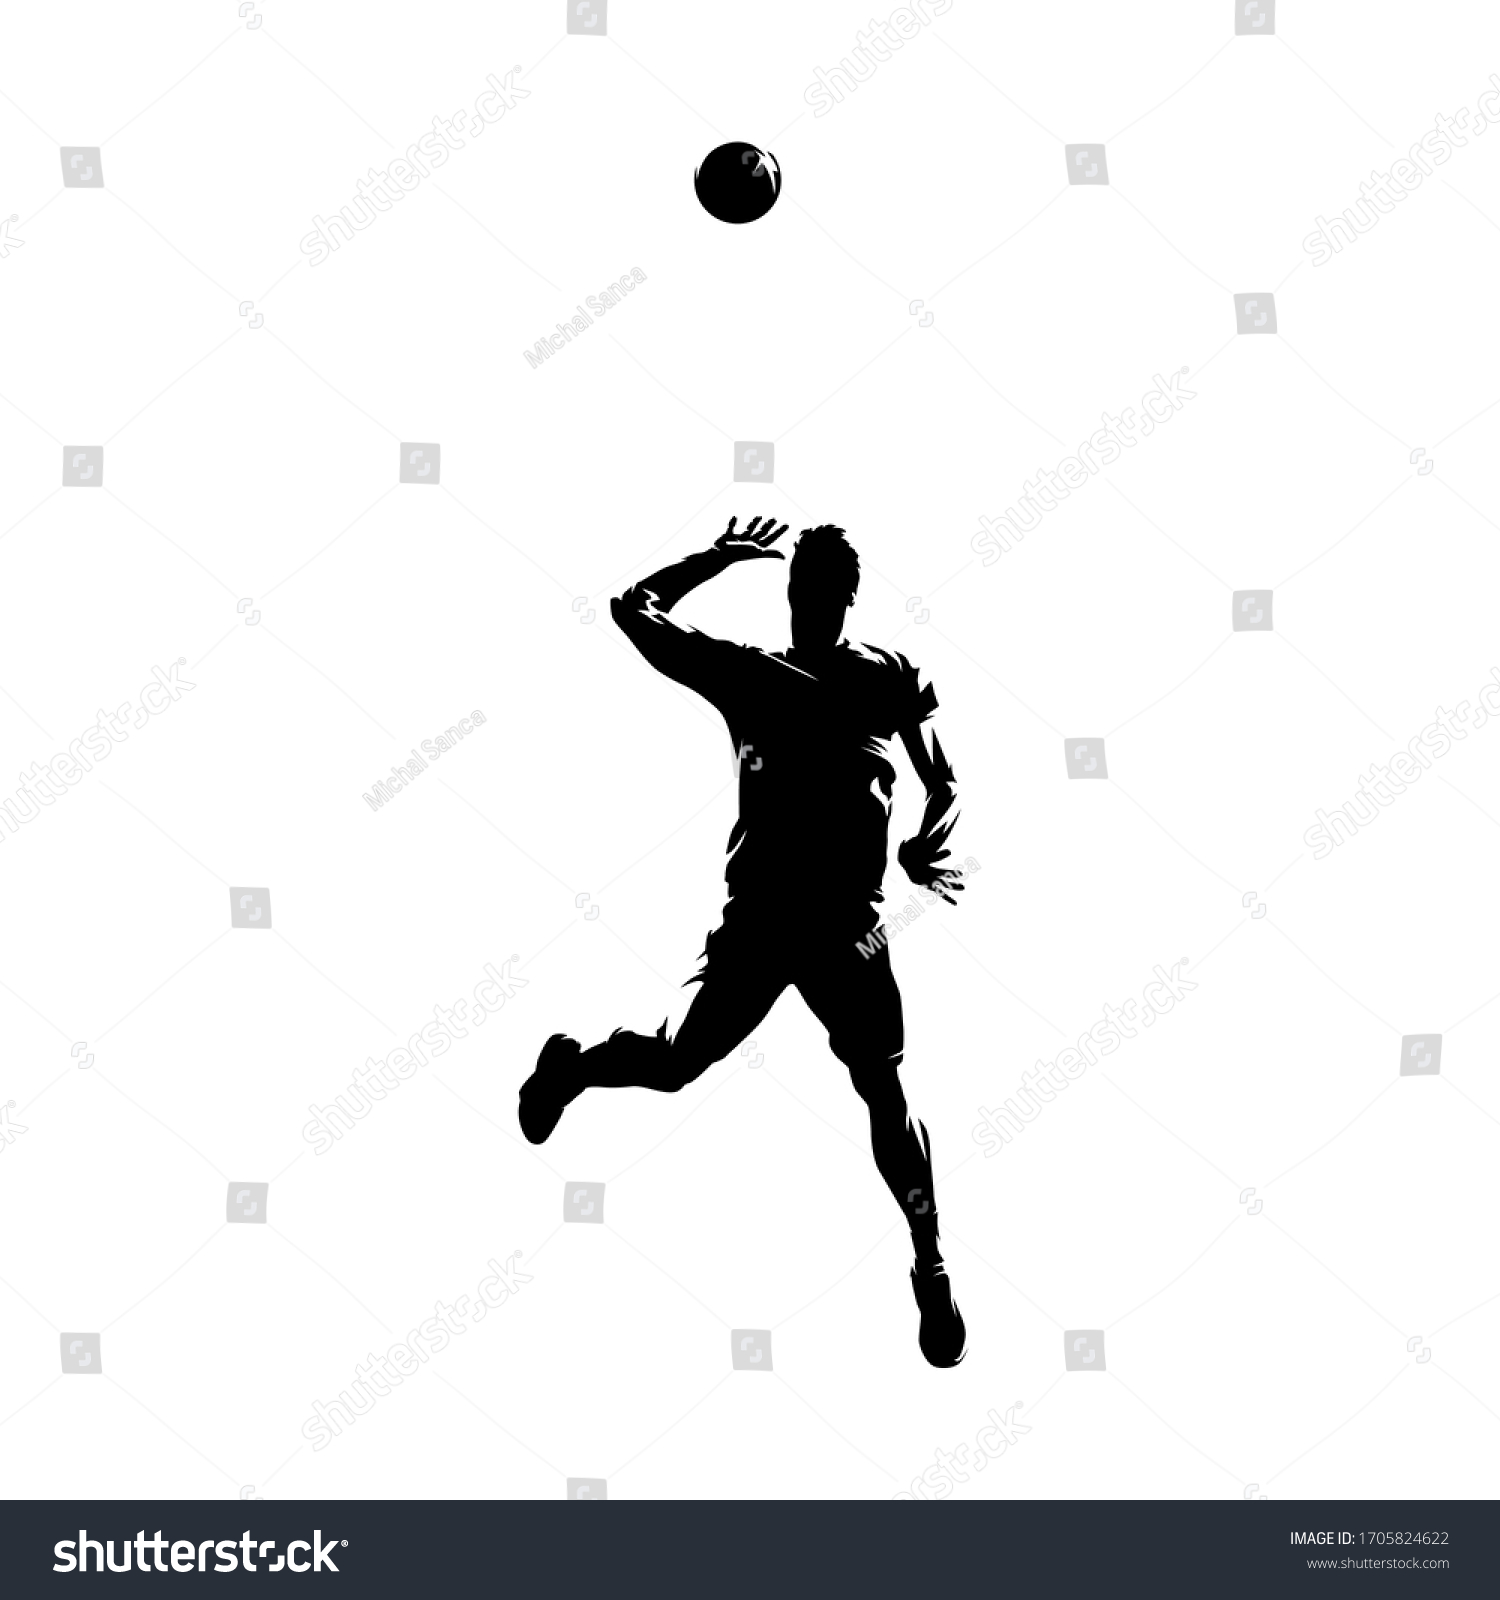 Volleyball Player Serving Ball Isolated Vector Stock Vector (Royalty ...